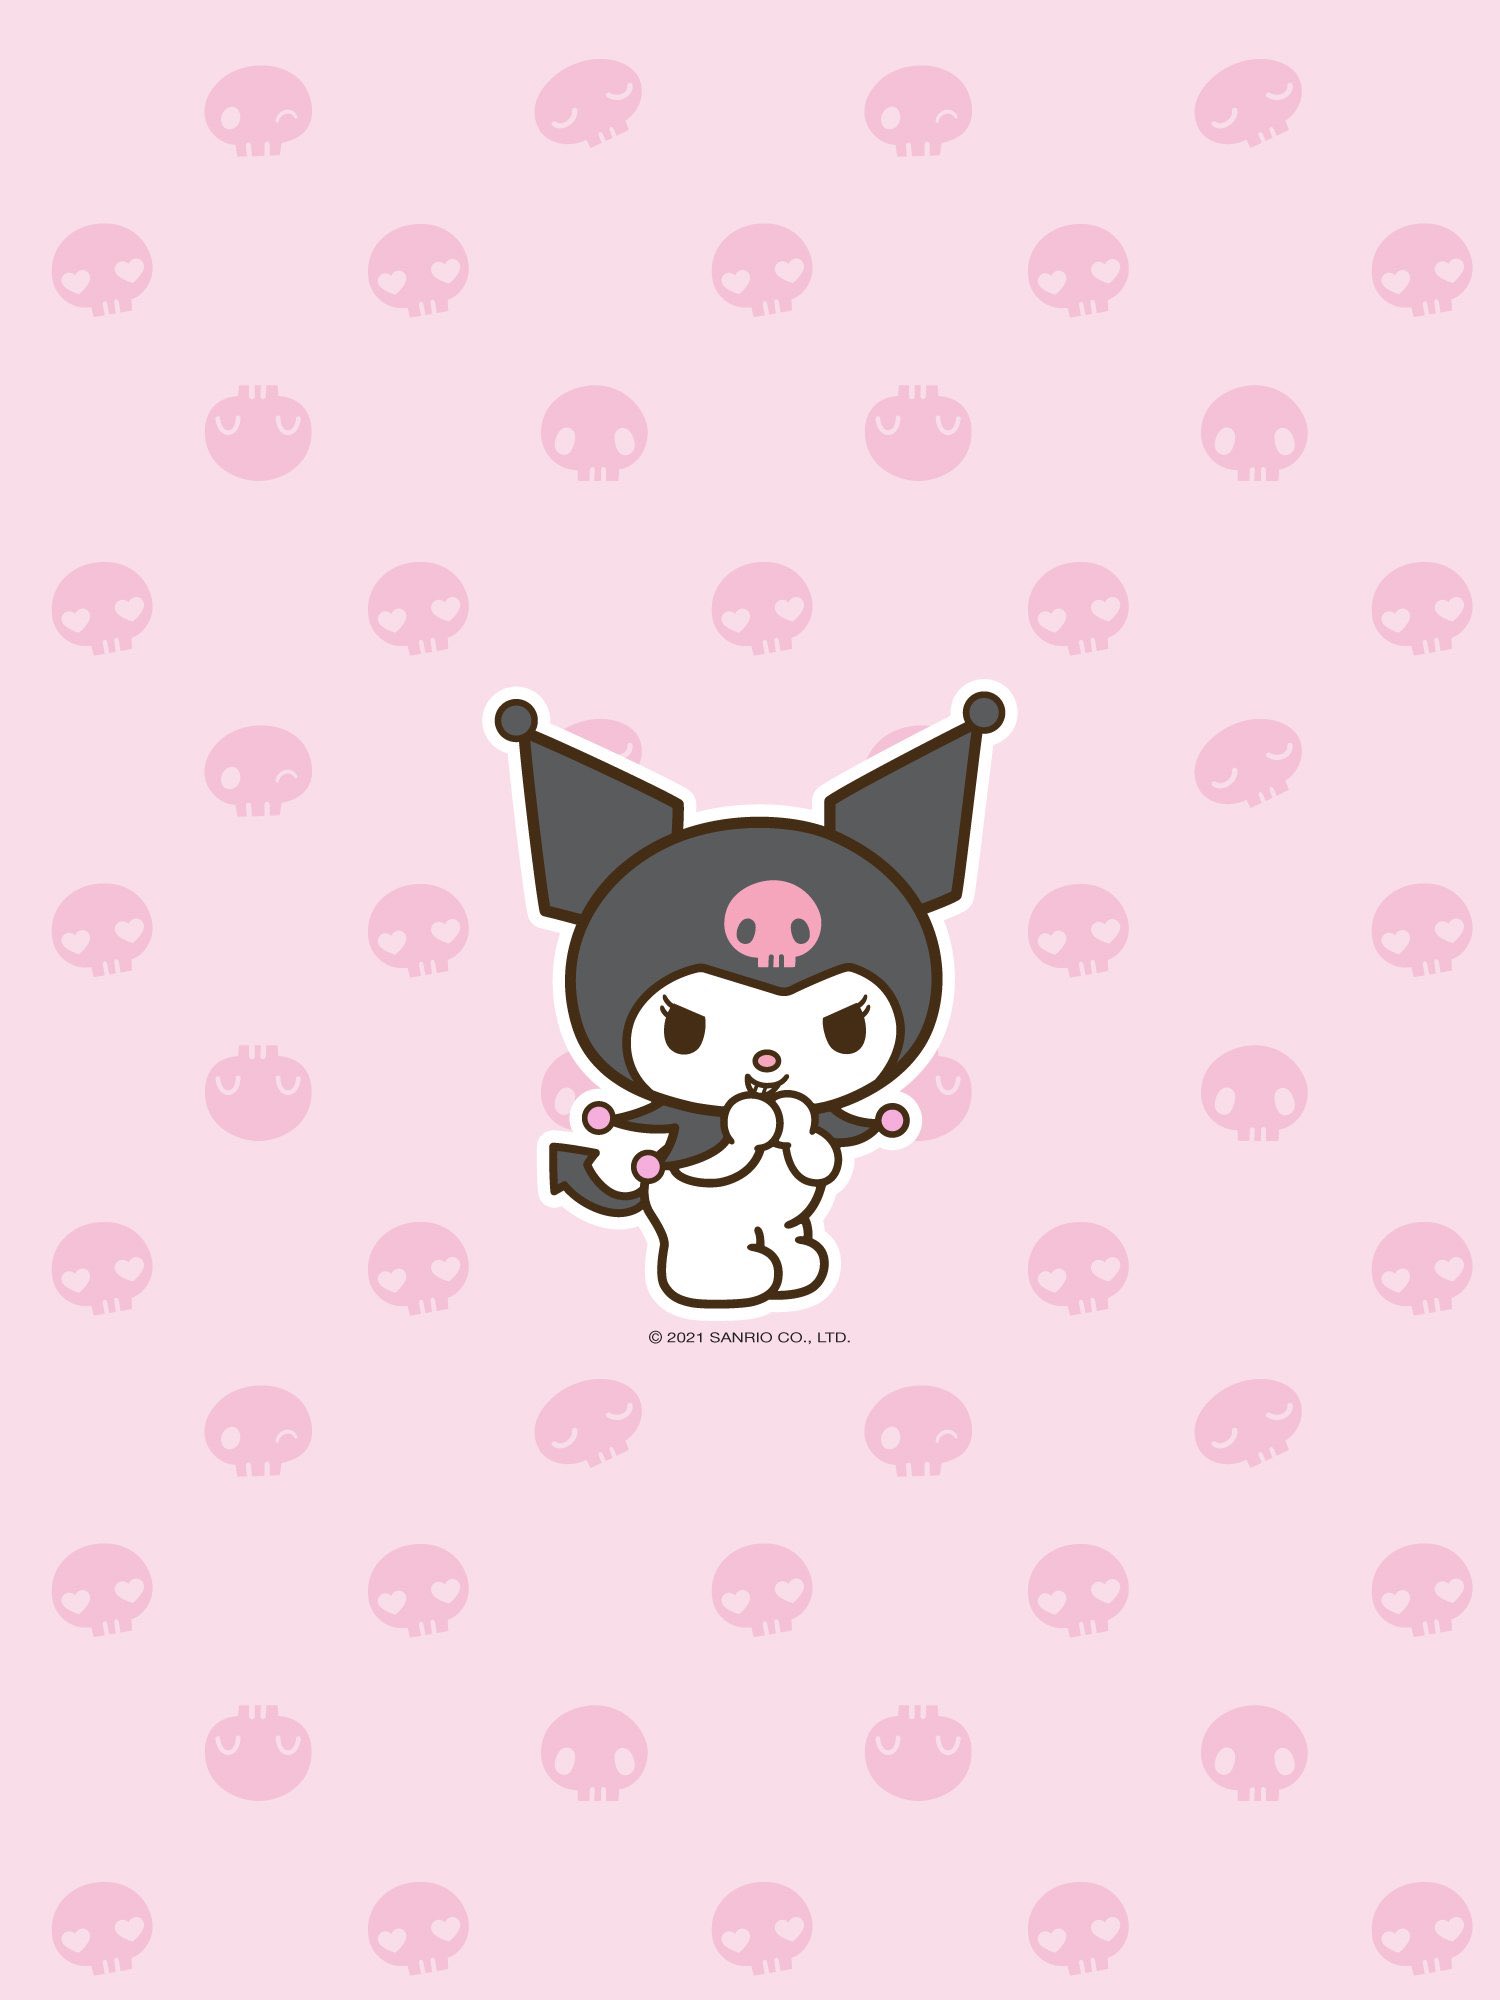 Candy Corpse really blessed us with the Kuromi wallpaper for October ✨